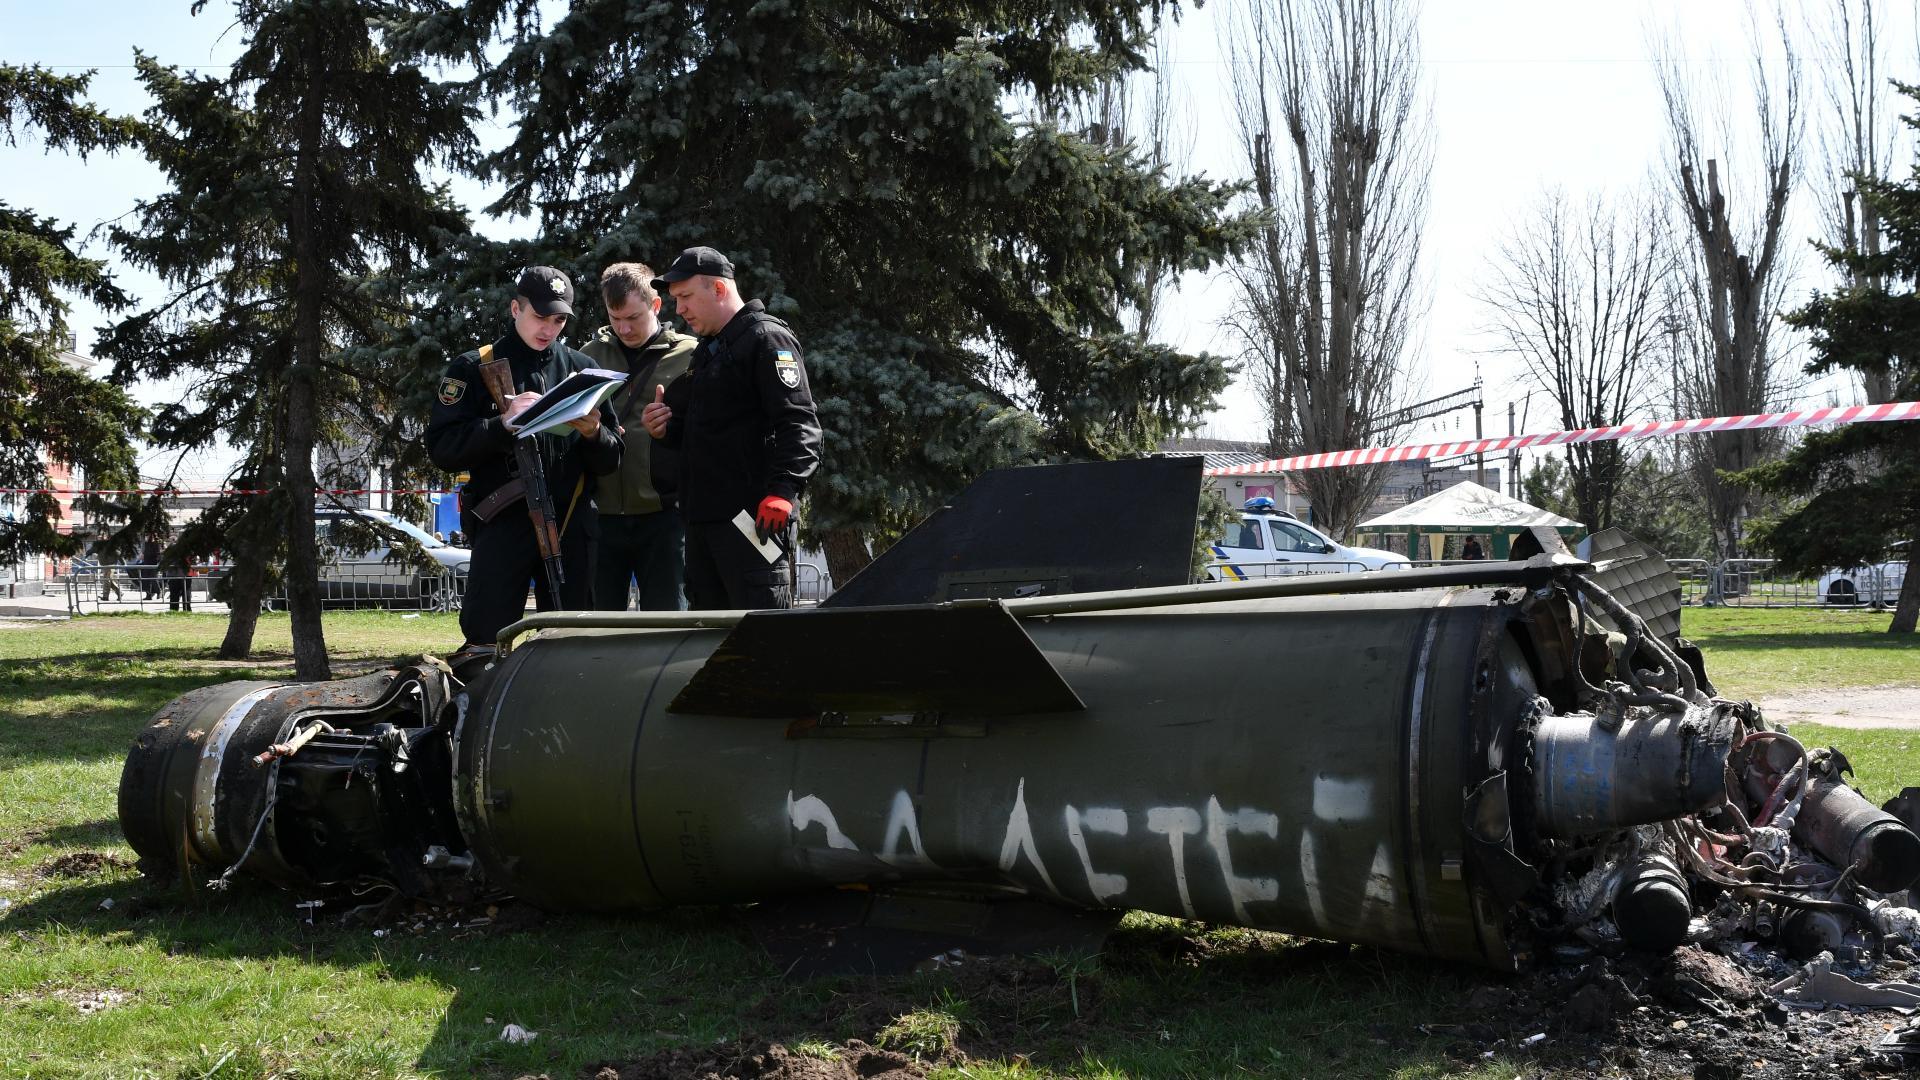 Ukrainian servicemen stand next to a fragment of a Tochka-U missile with a writing in Russian “For children”, on the grass after Russian shelling at the railway station in Kramatorsk, Ukraine, Friday, April 8, 2022. (AP Photo / Andriy Andriyenko)